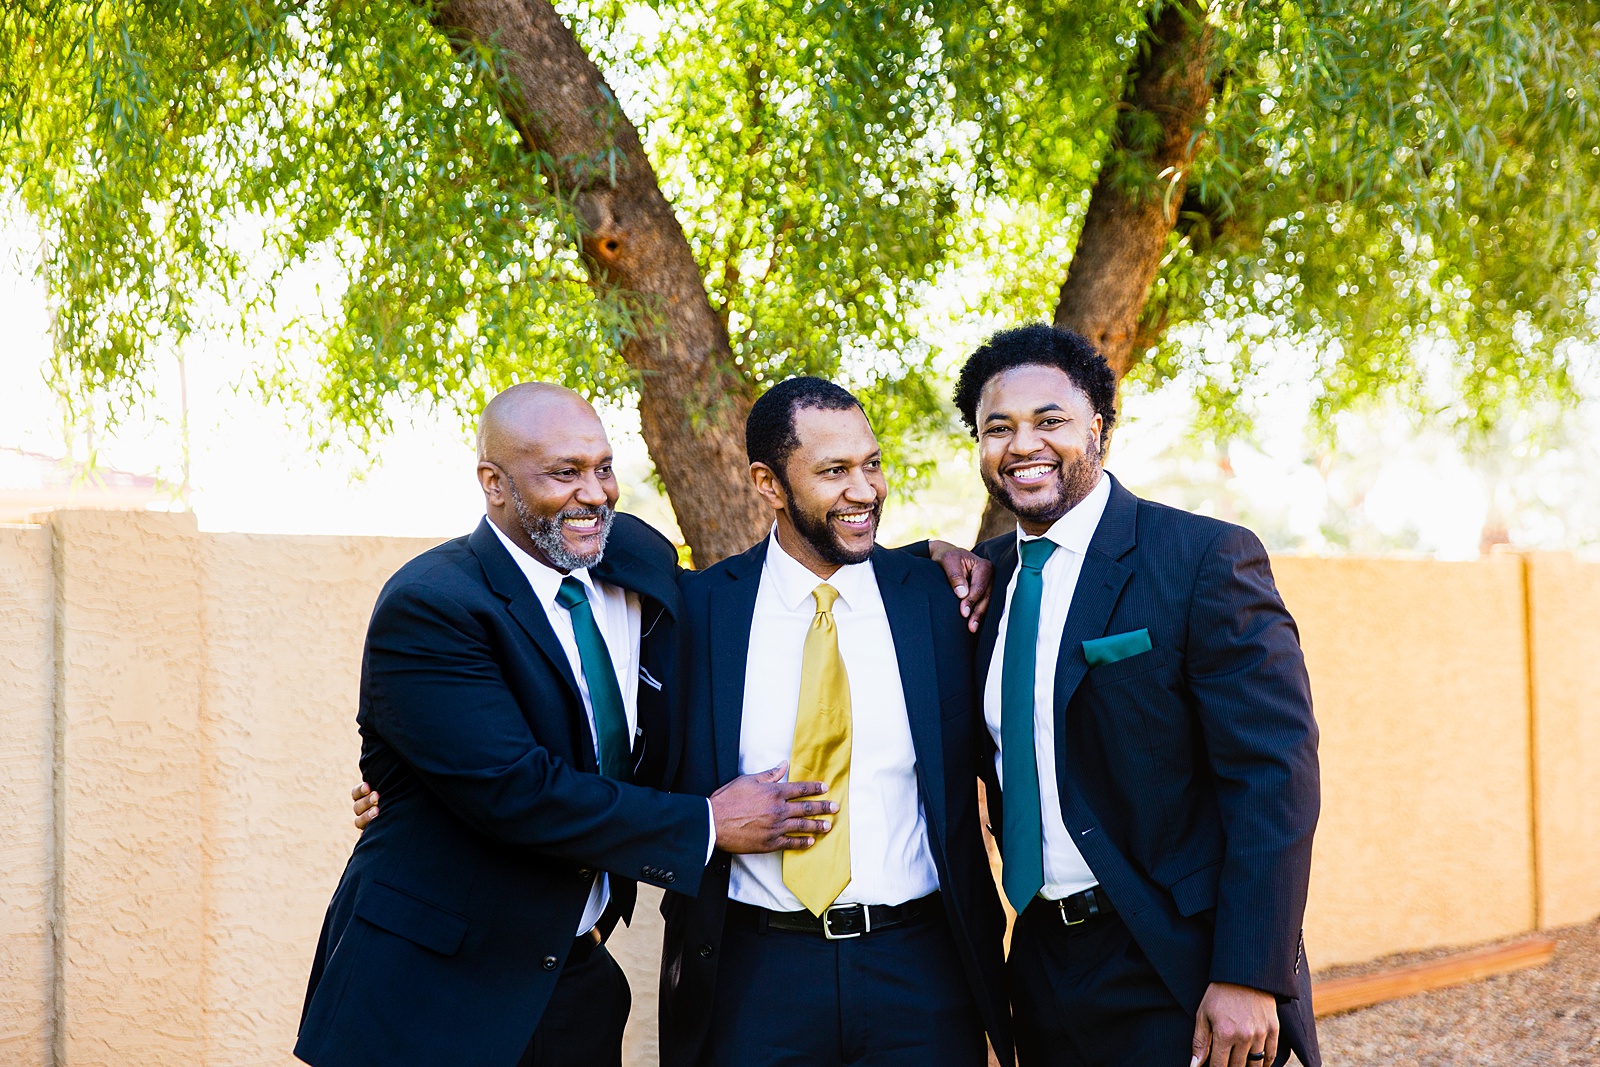 Groom and groomsmen laughing together at Backyard Micro wedding by Scottsdale wedding photographer PMA Photography.